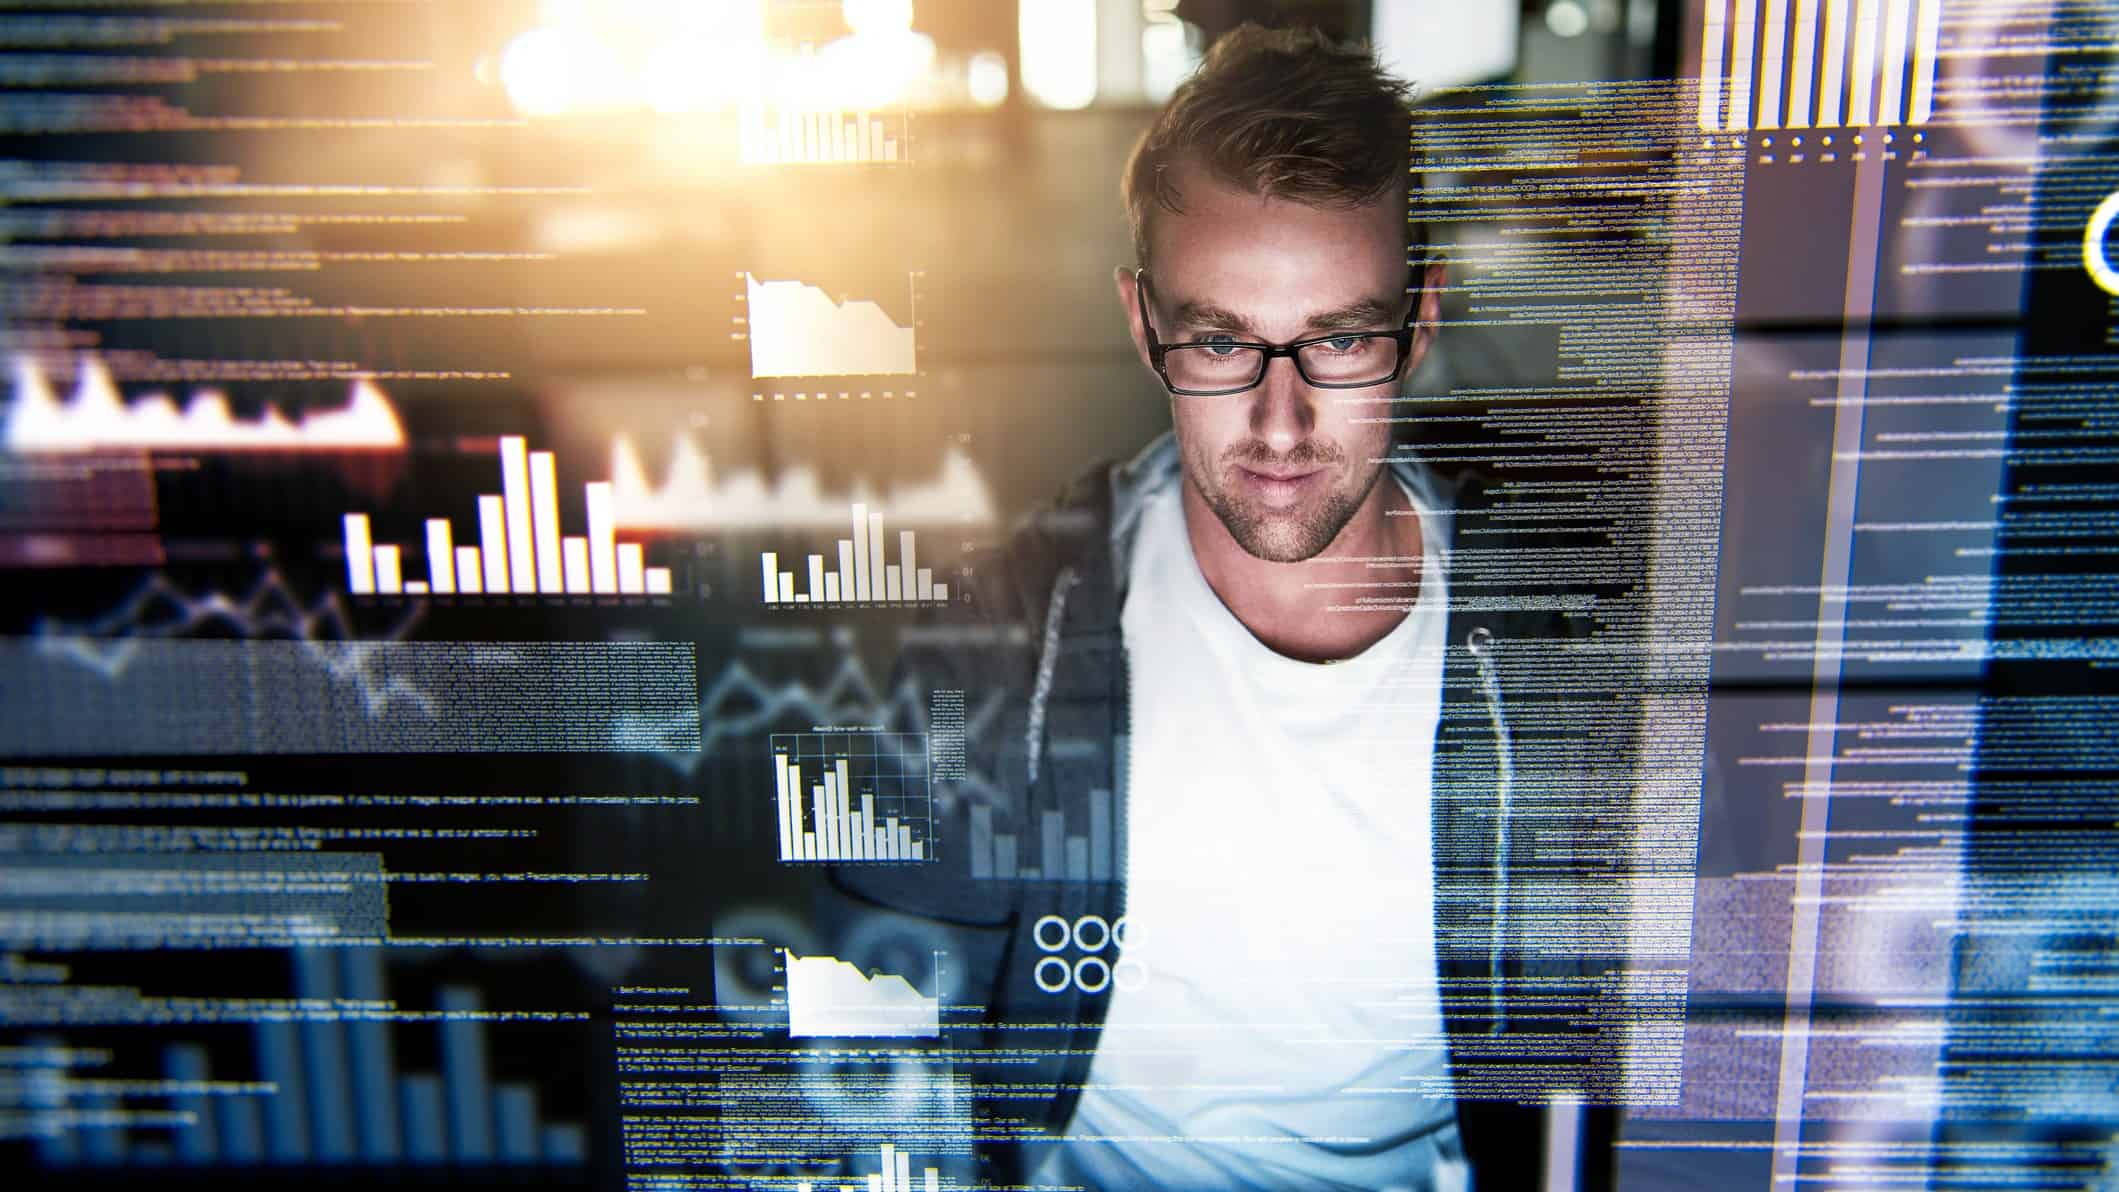 a man sits in casual clothes in front of a computer amid graphic images of data superimposed on the image, as though he is engaged in IT or hacking activities.